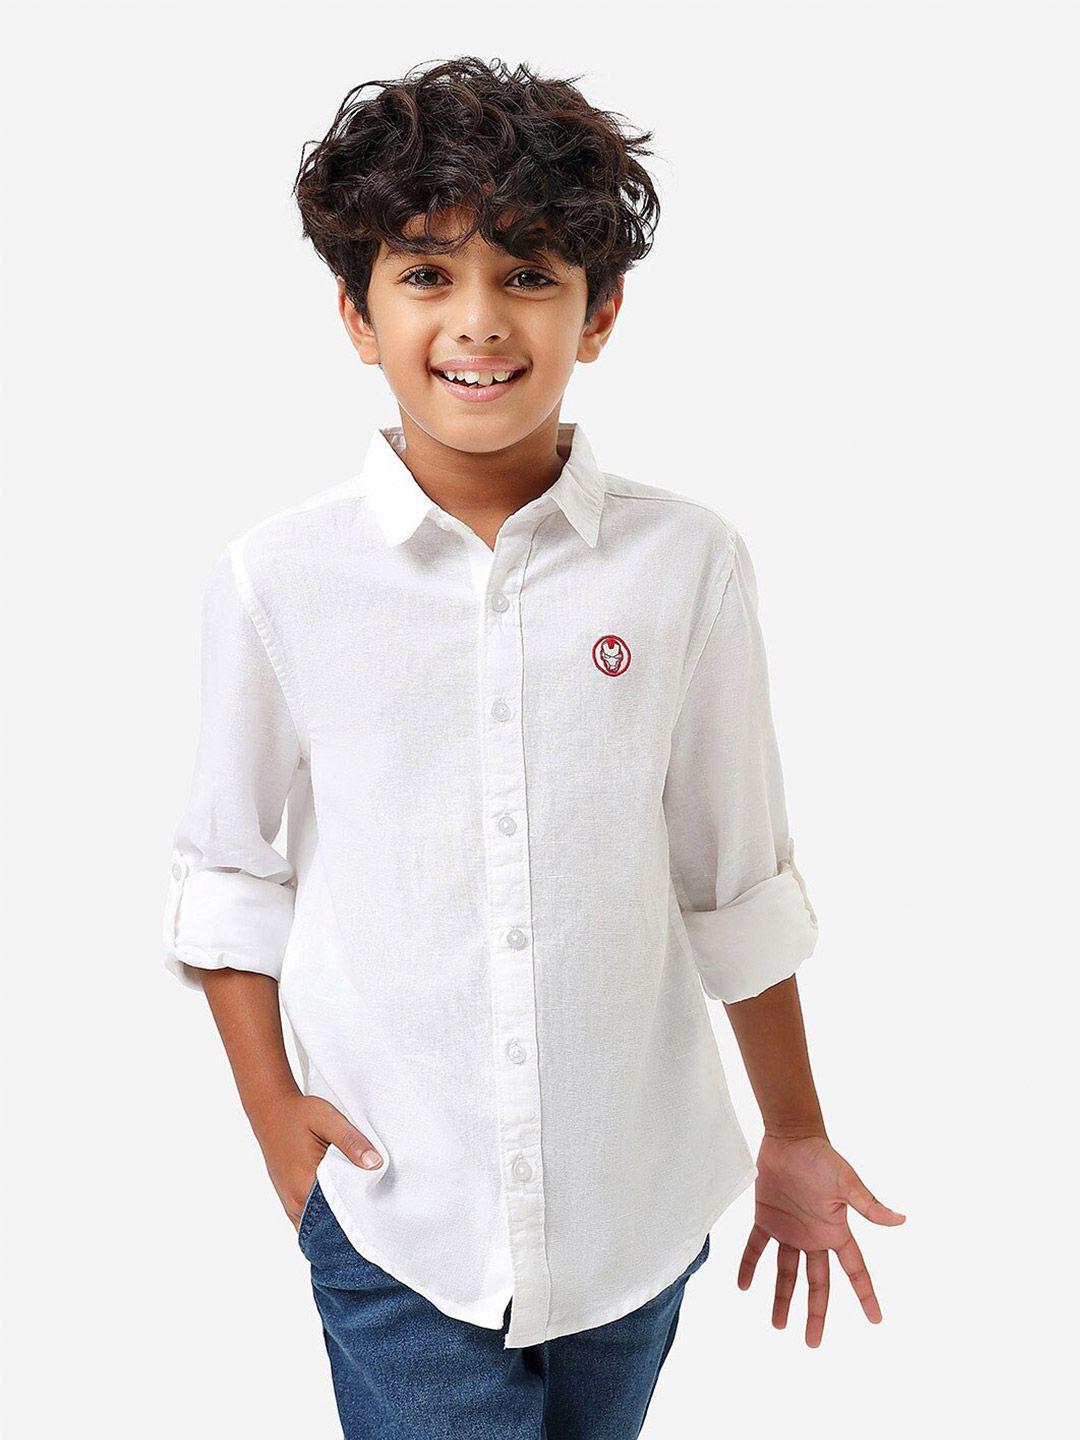 bonkids boys spread collar casual cotton shirt with iron man embroidery